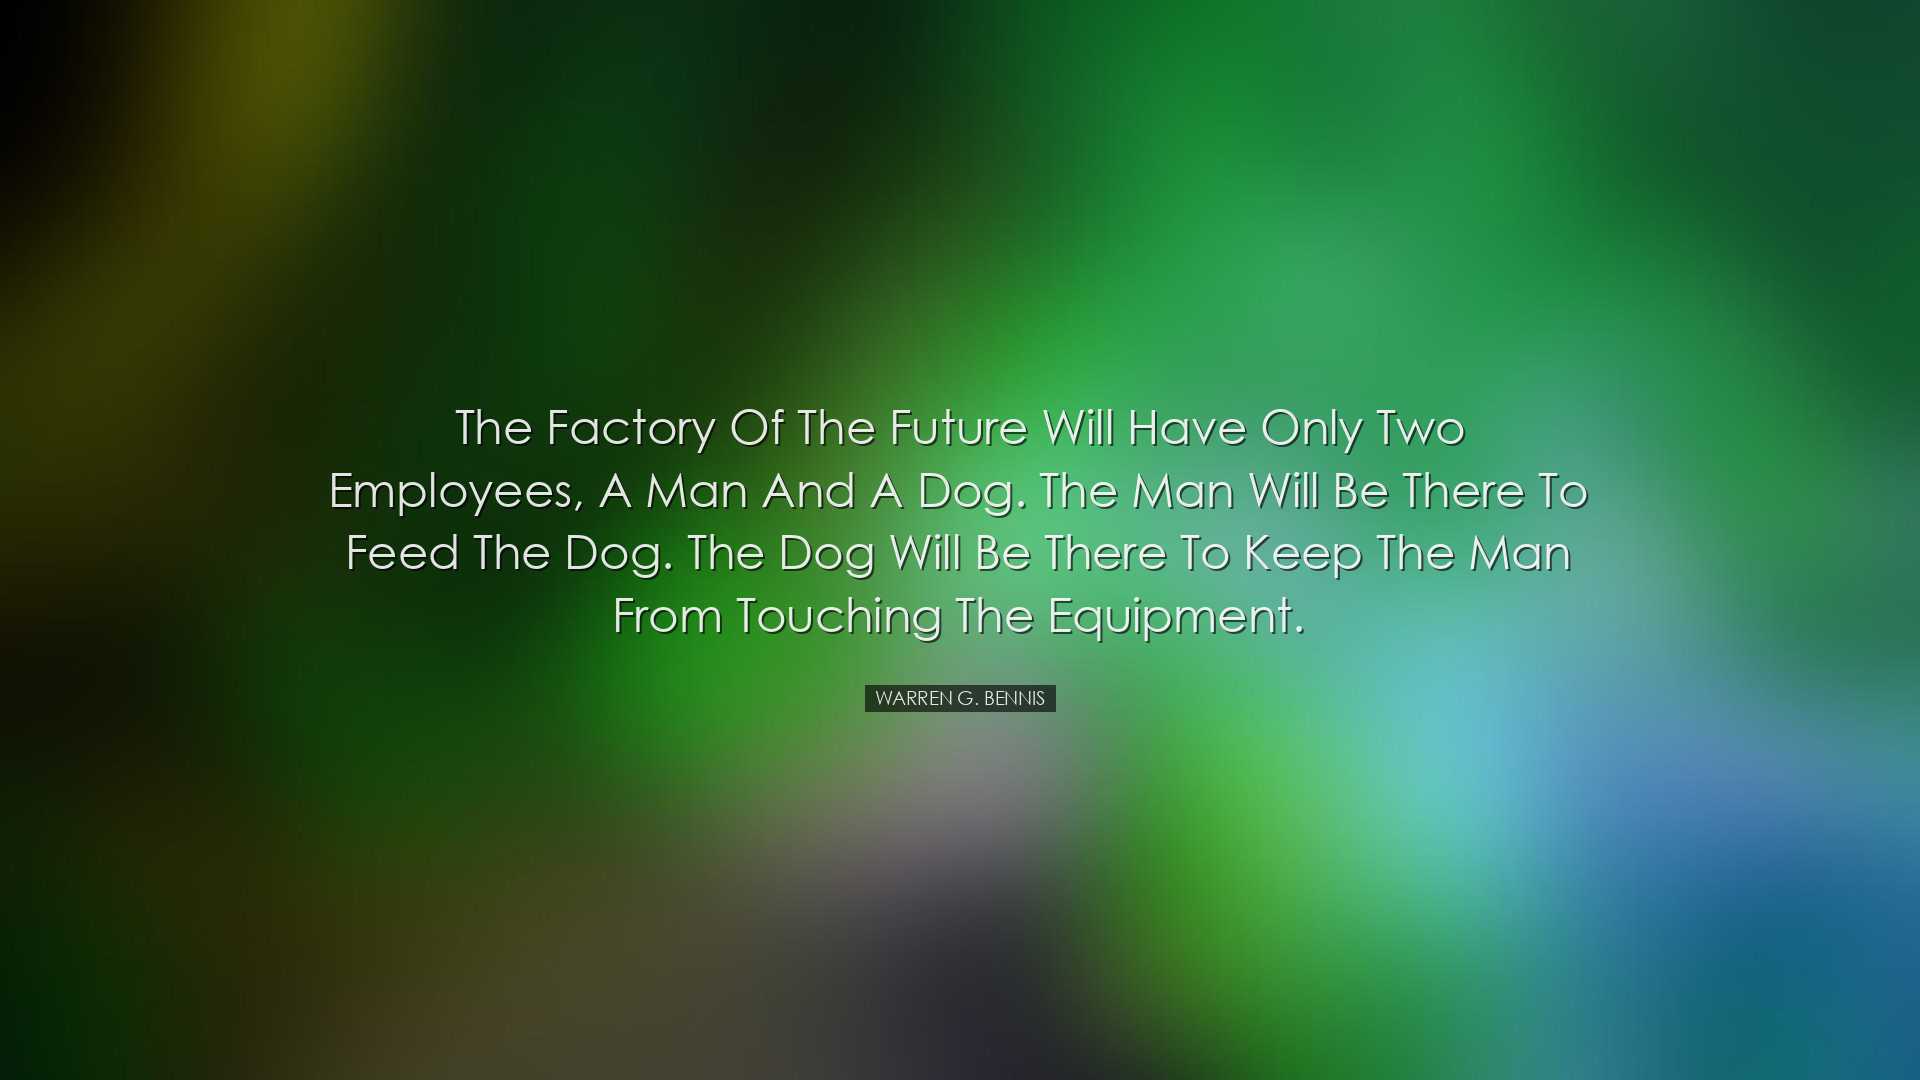 The factory of the future will have only two employees, a man and